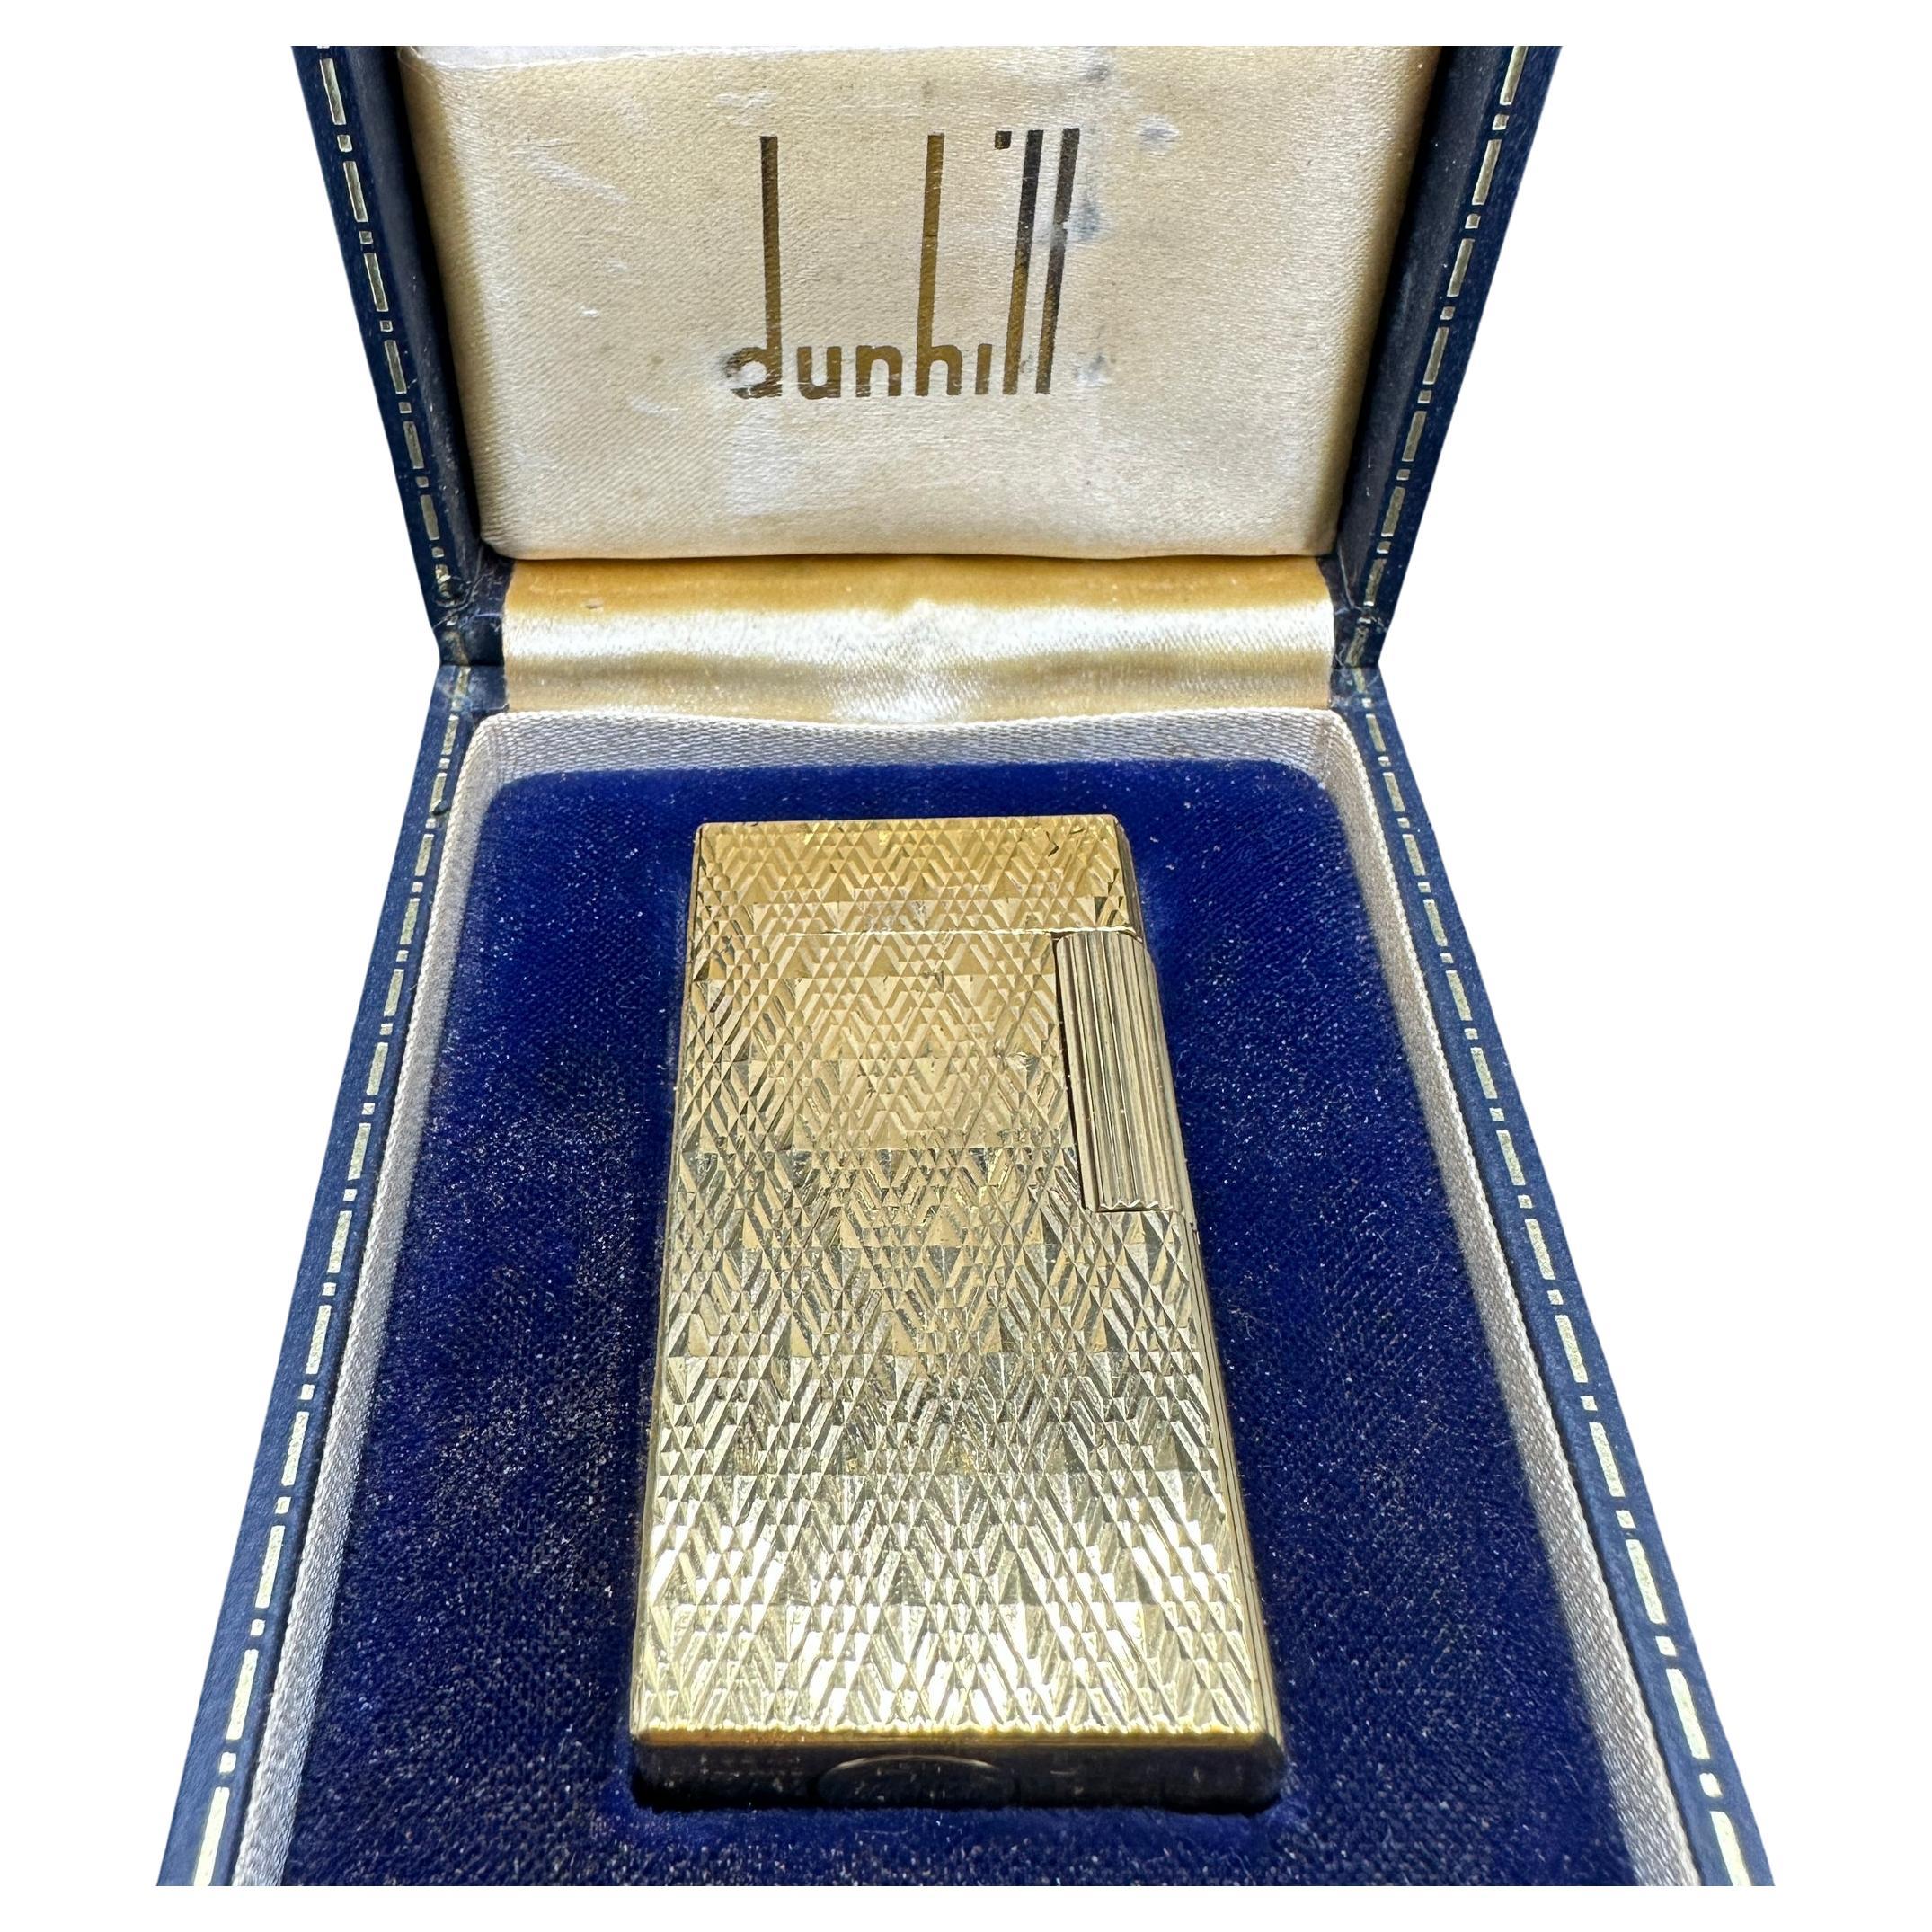 Vintage Gold Platted 1960s Dunhill Lighter.
In fantastic working and exterior condition.
This lighter has its original luxuries box with a rich British Blue Velvet interior.
Not only that they do not make them like this anymore but this lighter and